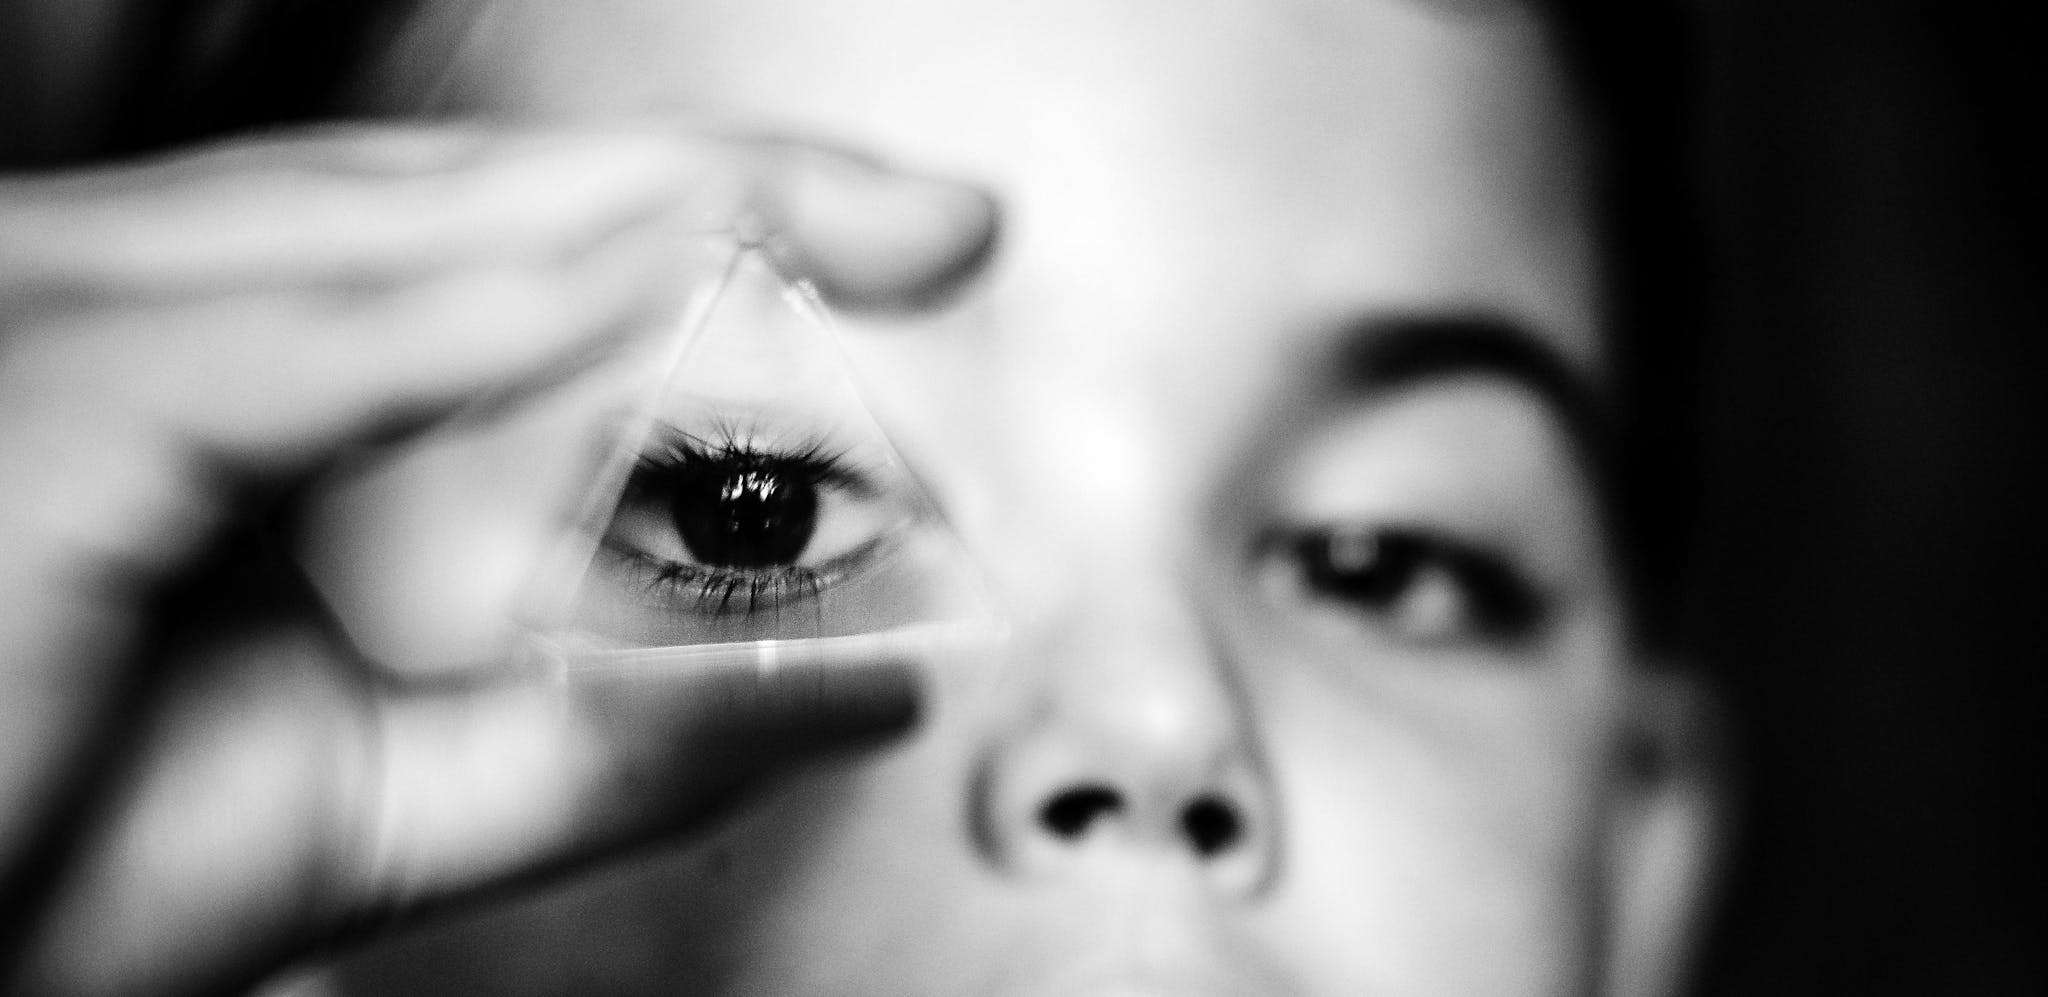 Black and white image of a child looking through a glass triangular object which magnifies his eye